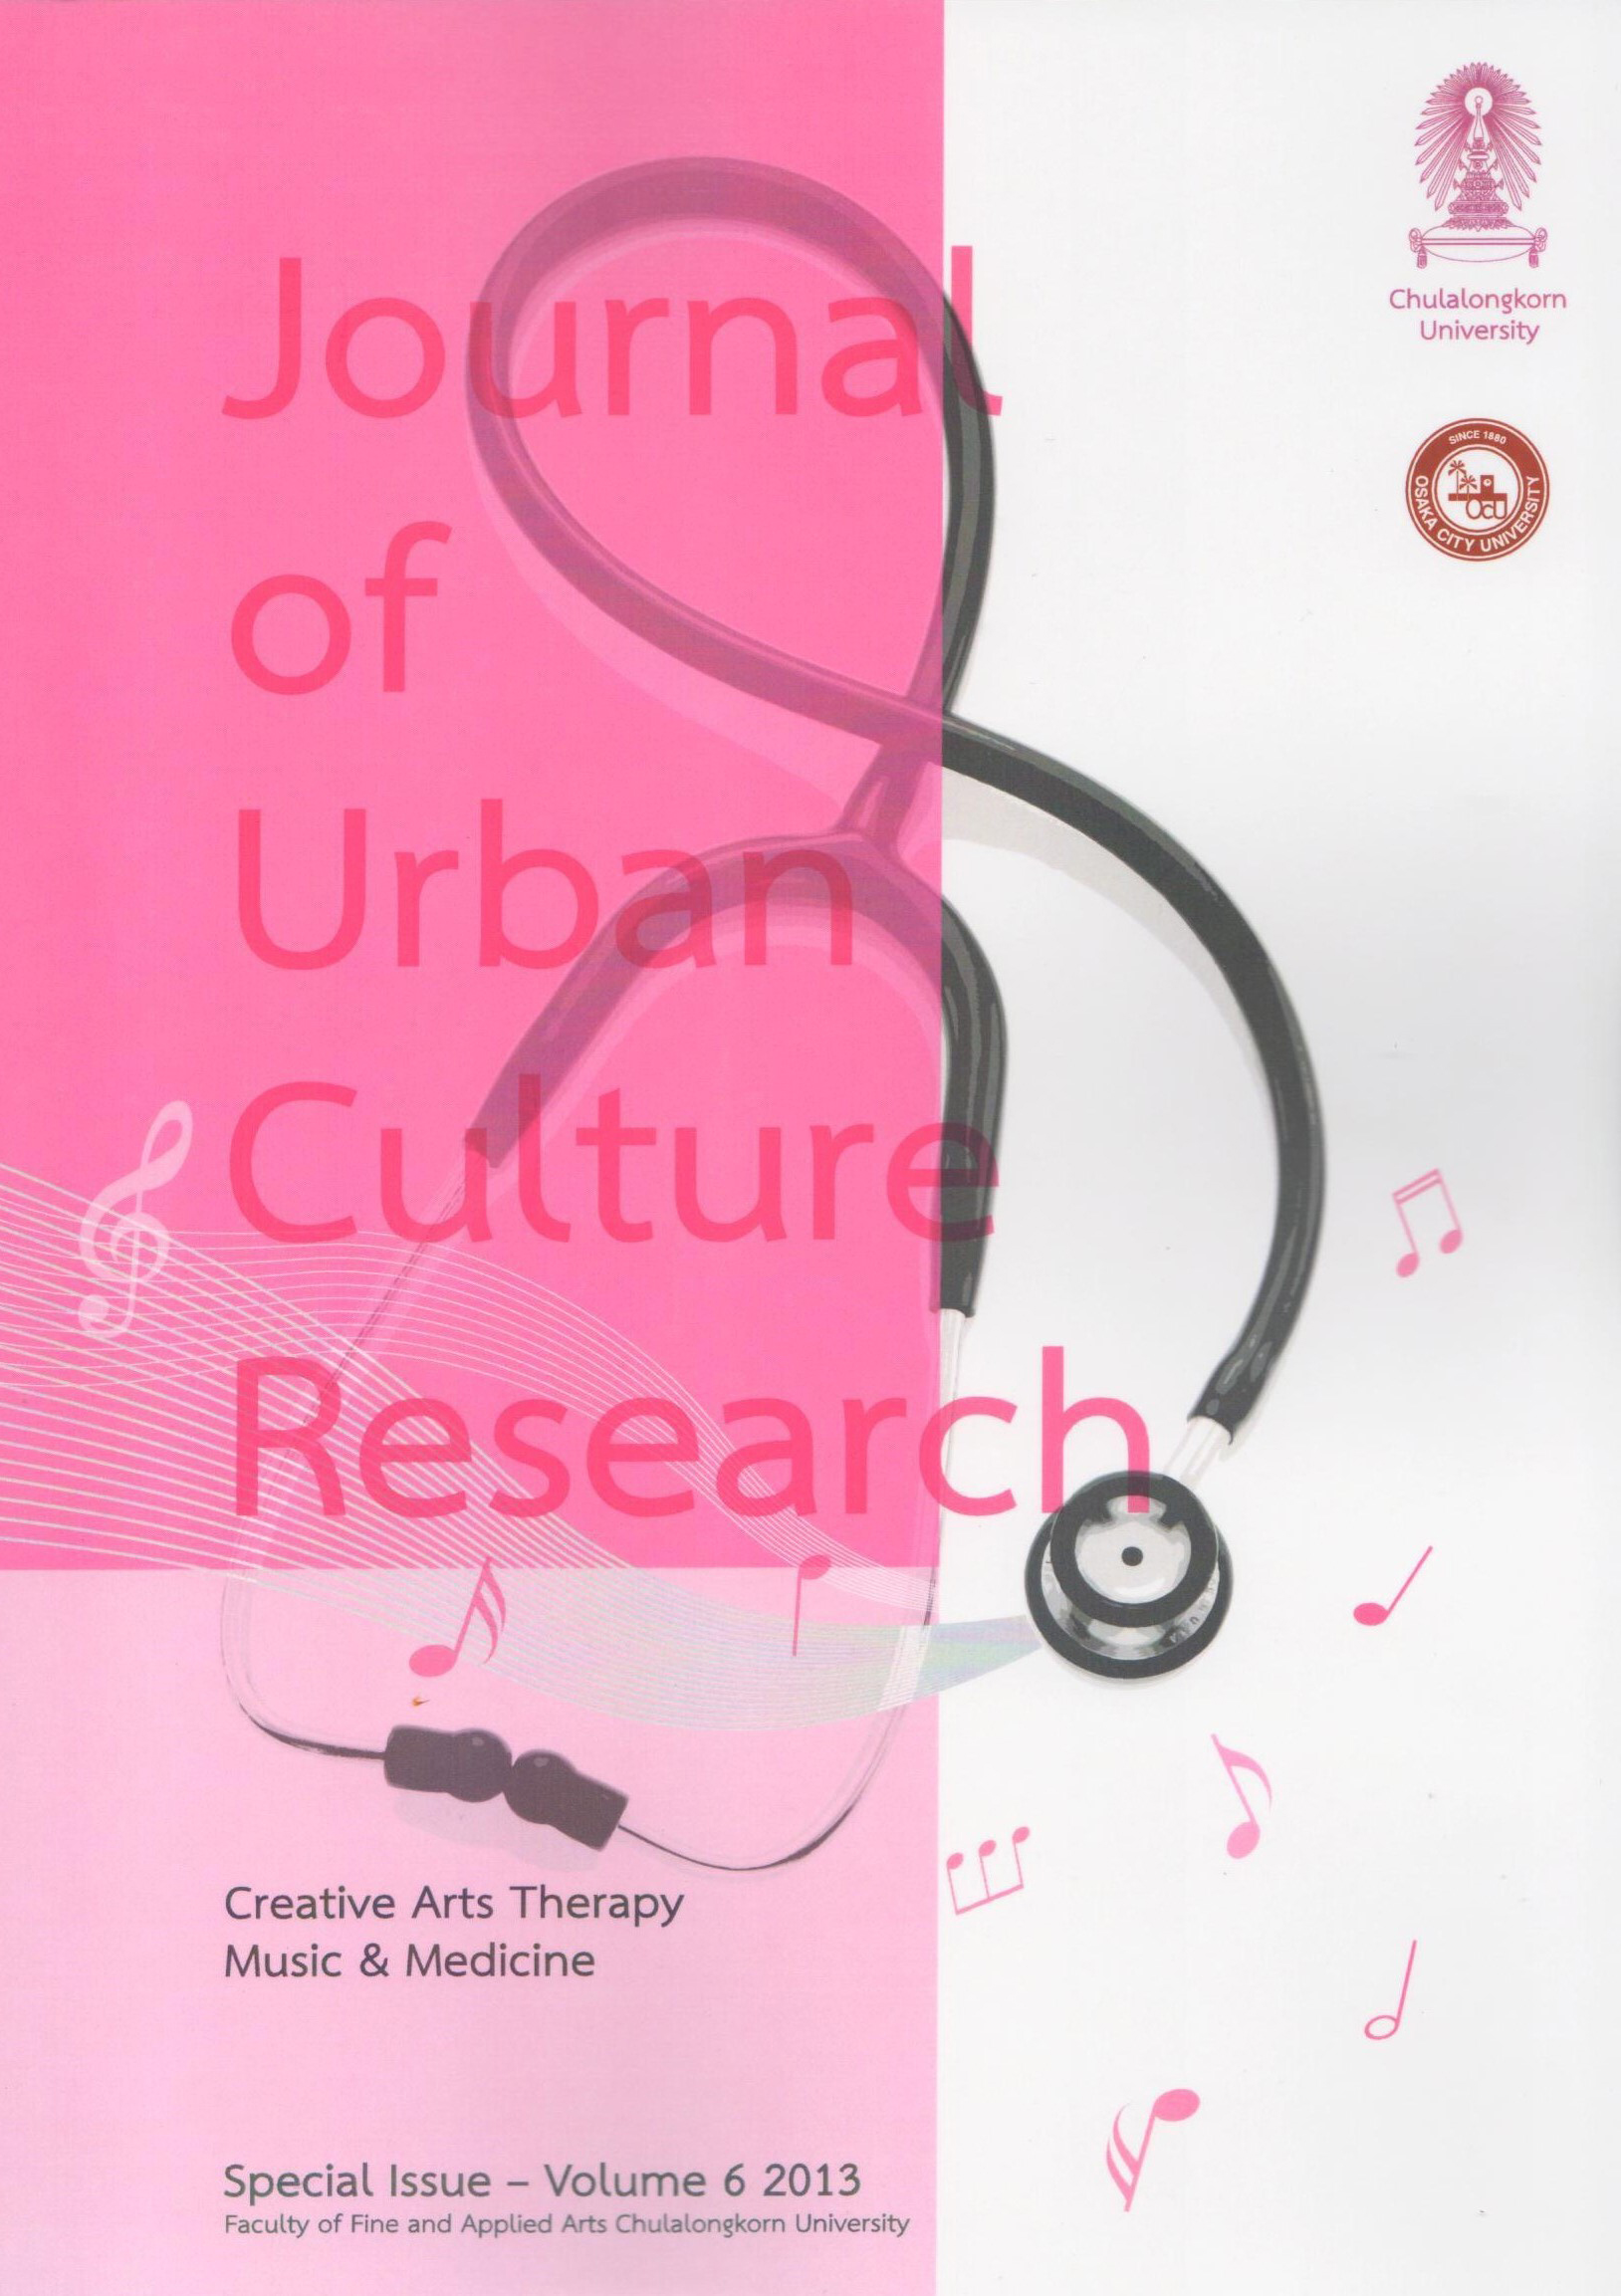 Journal of Urban Culture Research - creative arts therapy - music and medicine